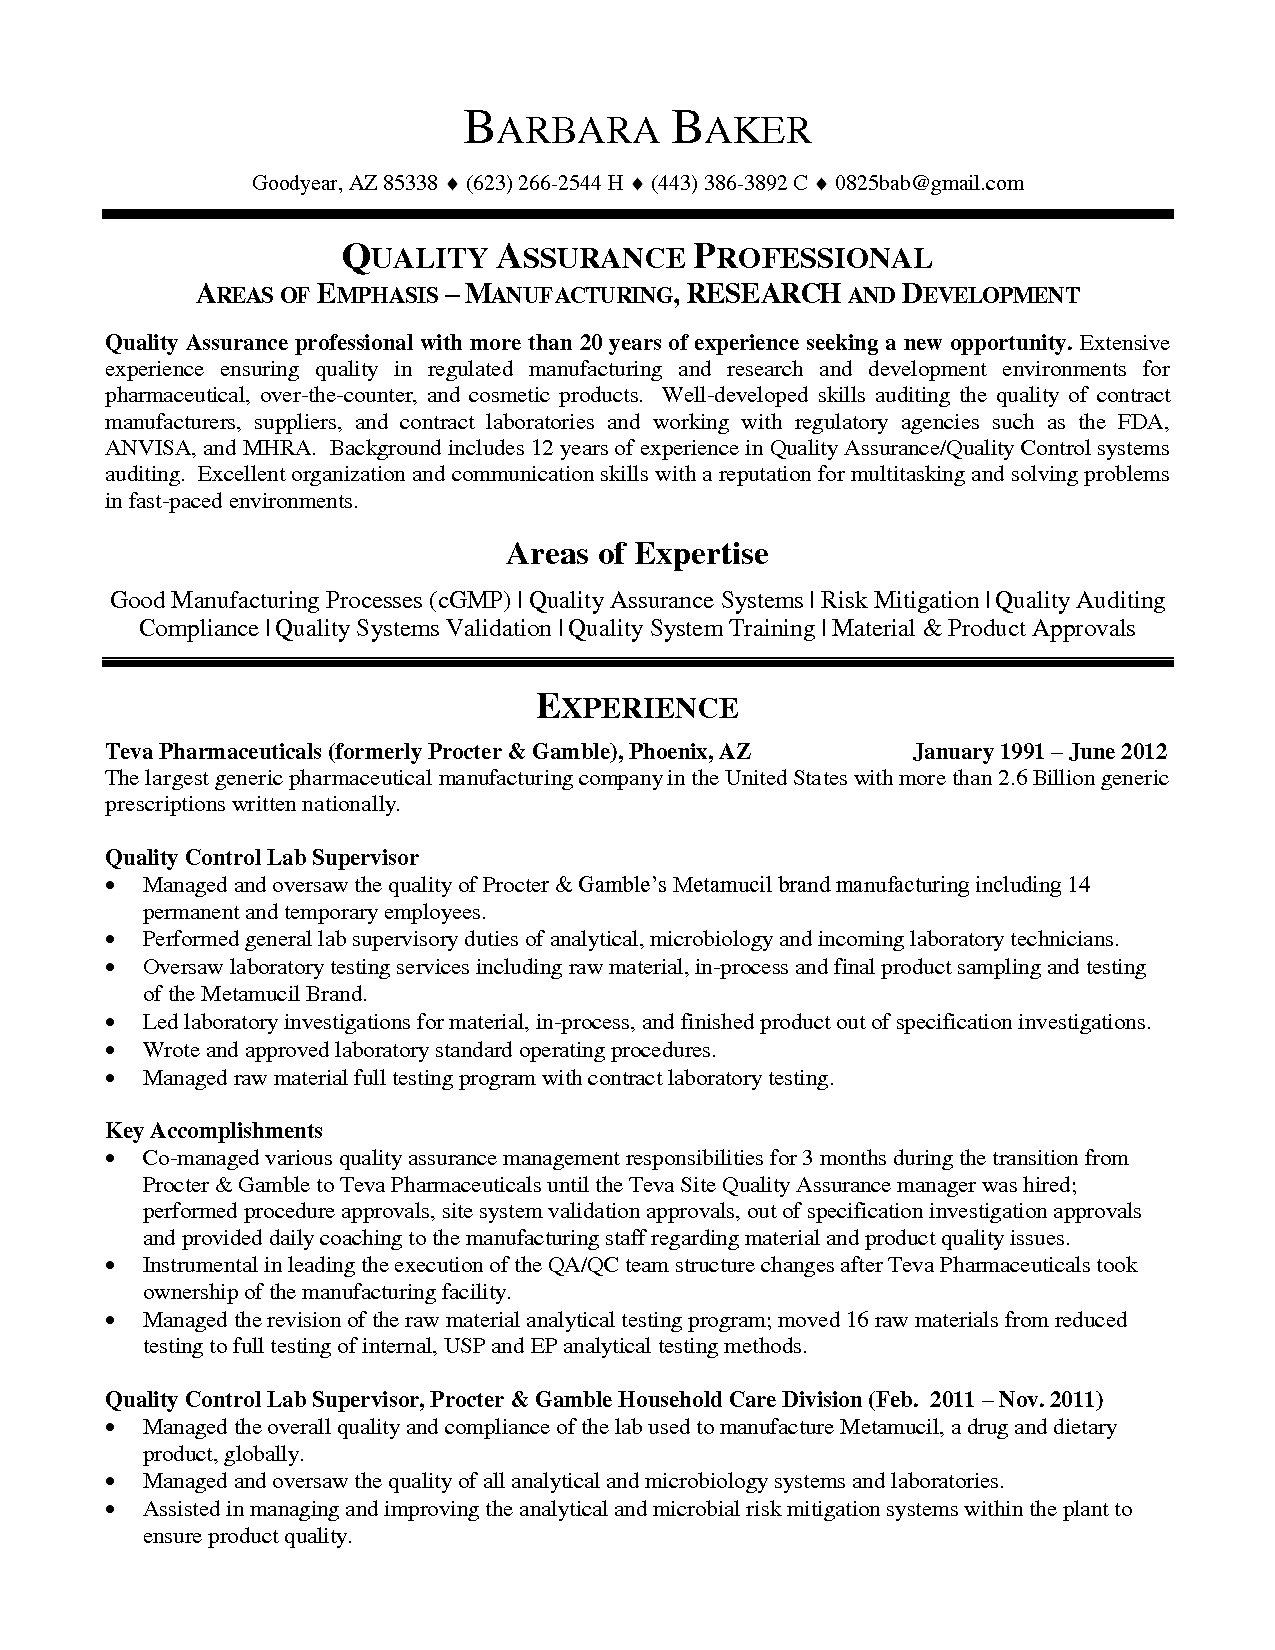 Resume Format Quality Control Manager 